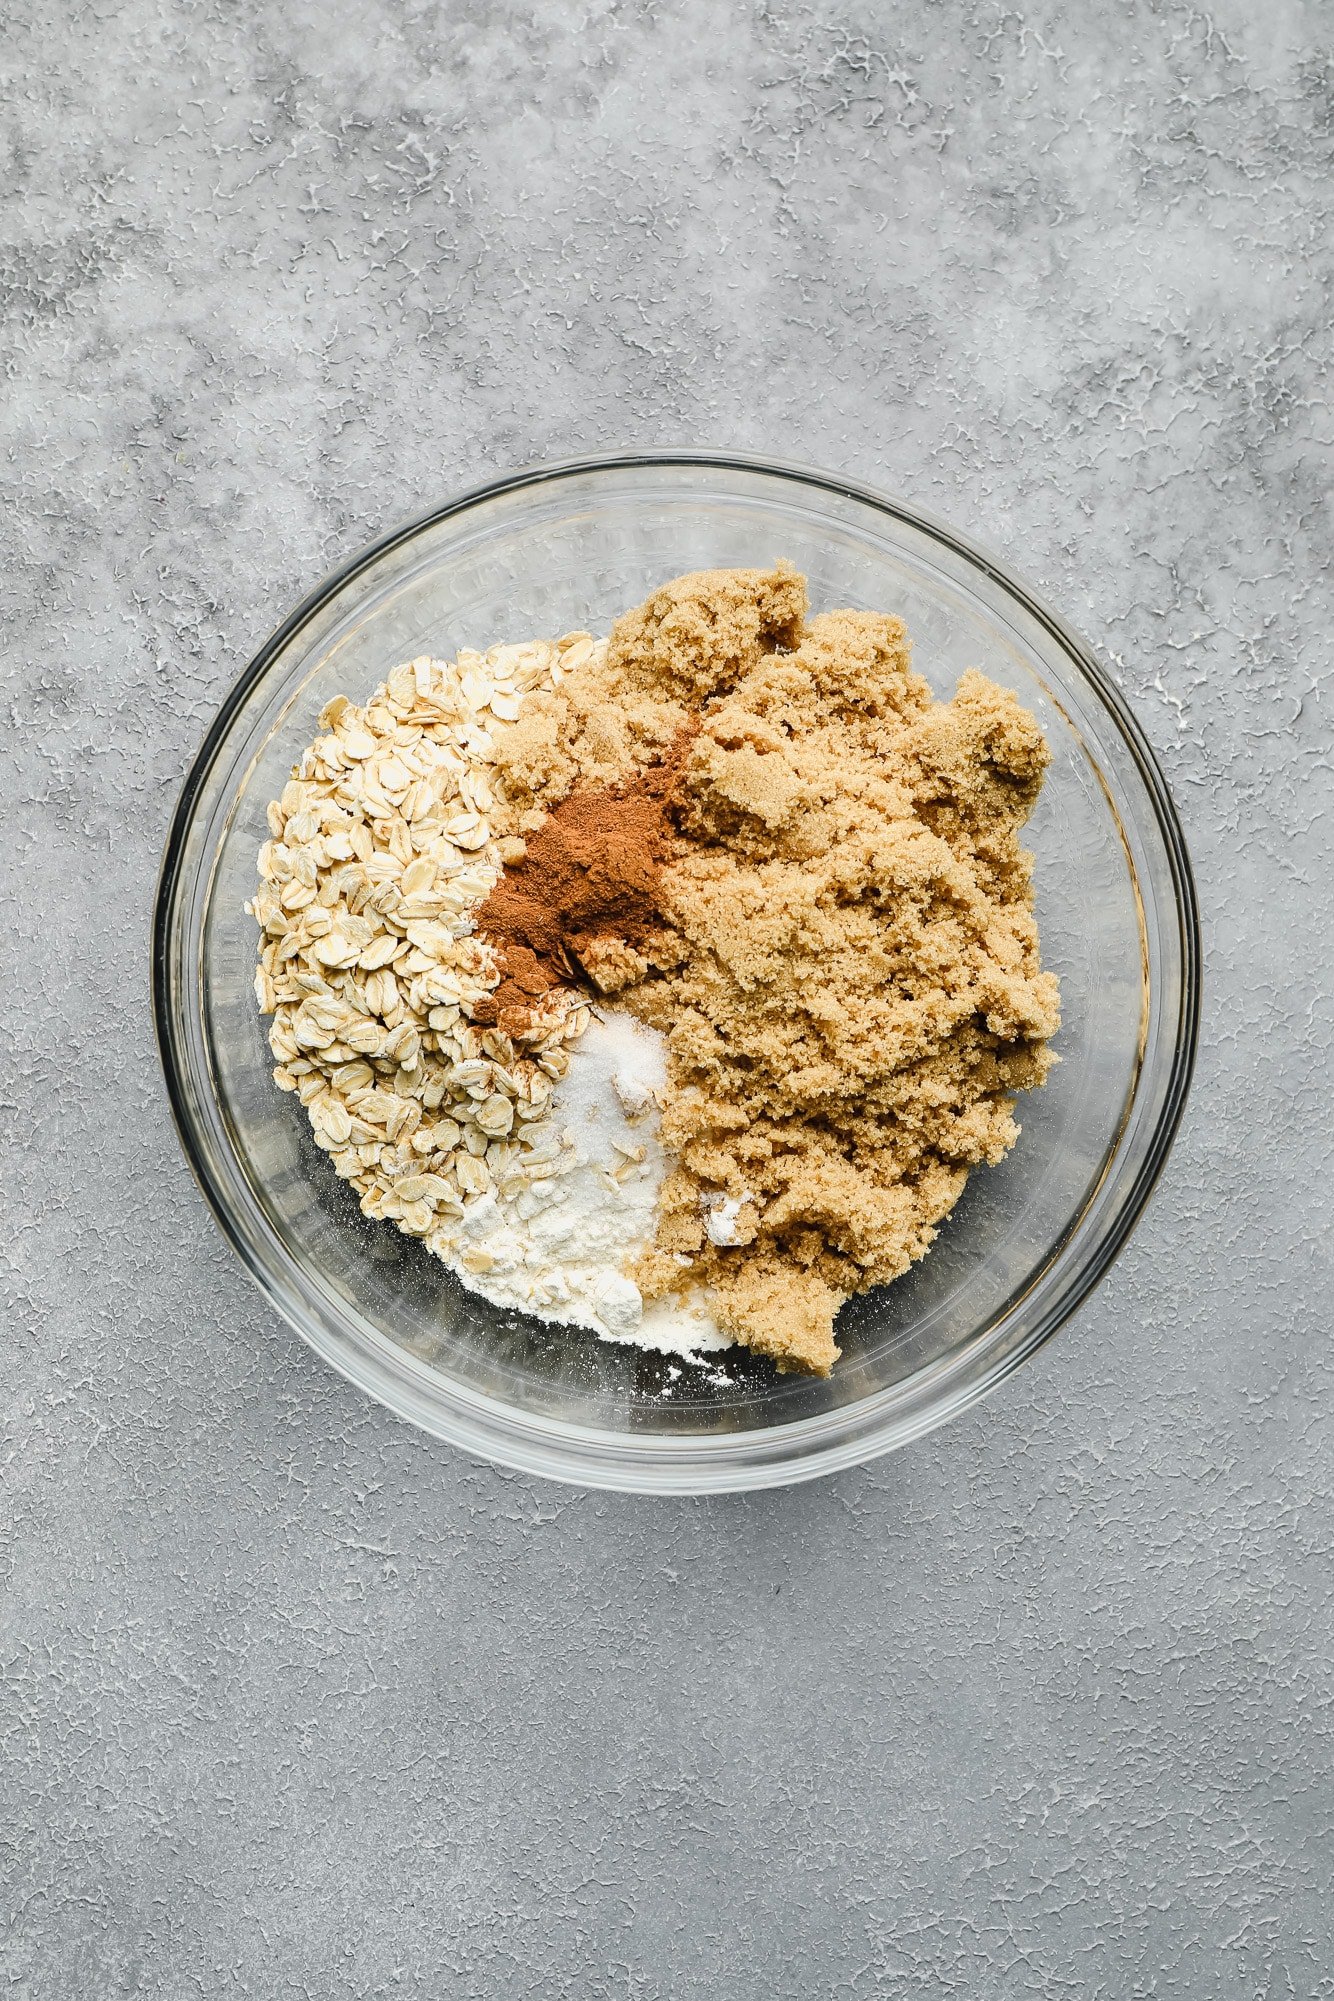 brown sugar, oats, cinnamon, and flour mixed together in a glass bowl.